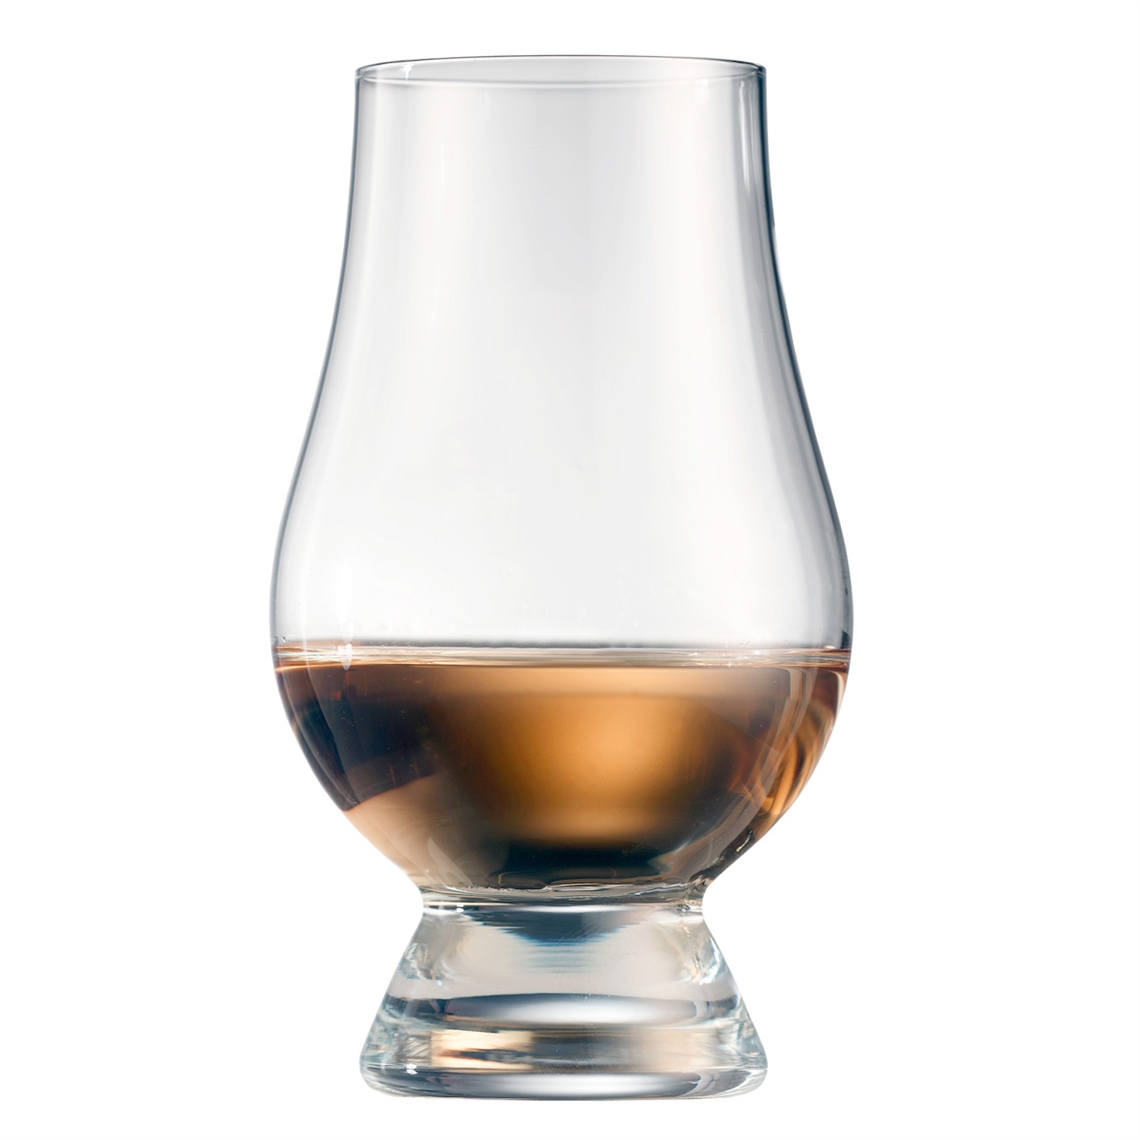 View more red wine glasses from our Whisky Glasses range